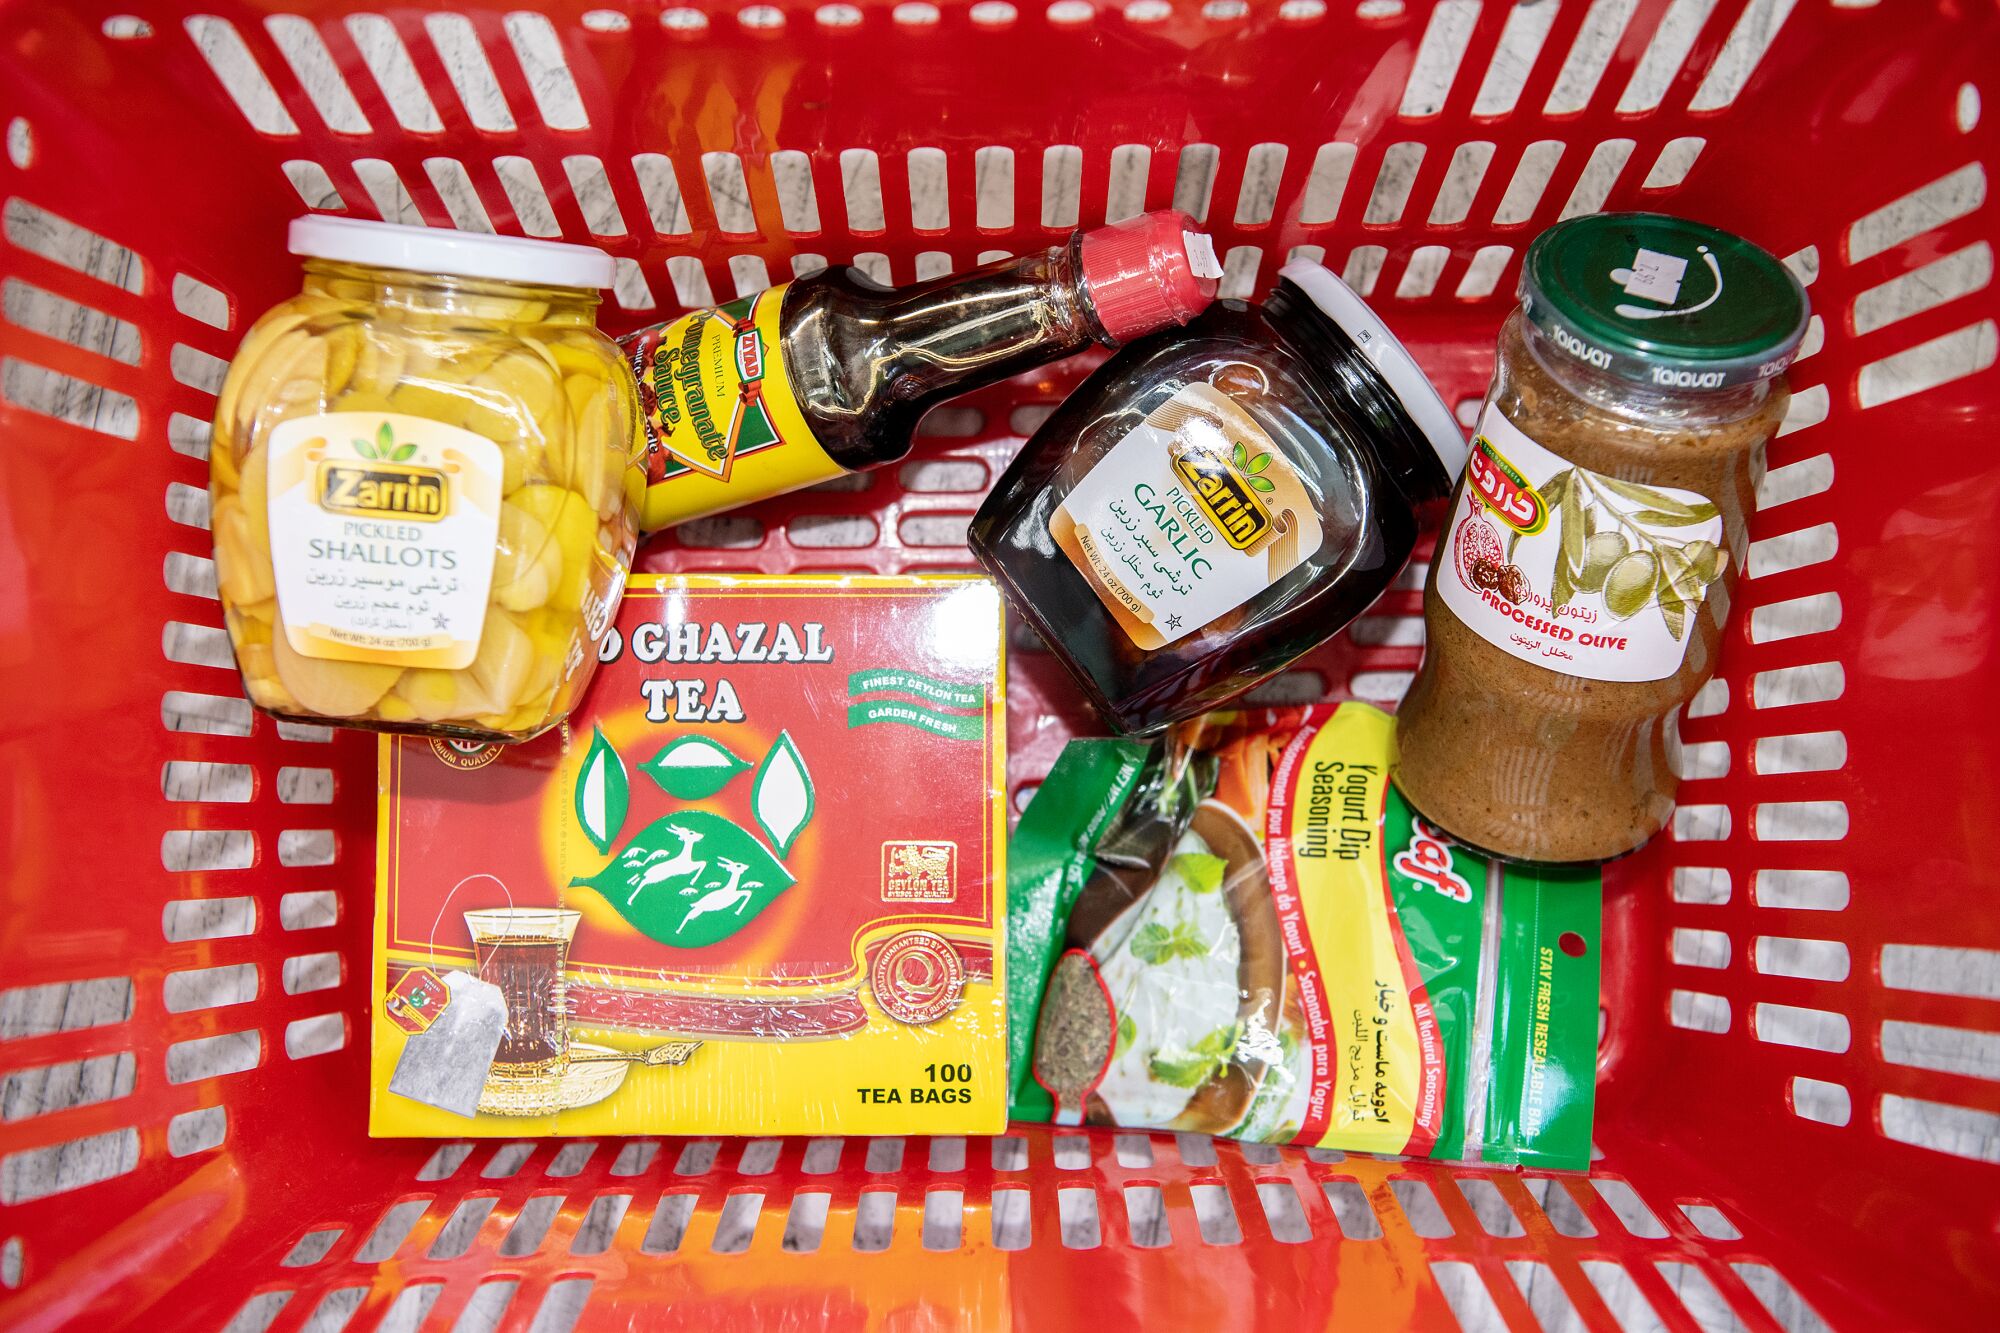 Items in a red plastic shopping basket include tea, jams and bottled sauces.